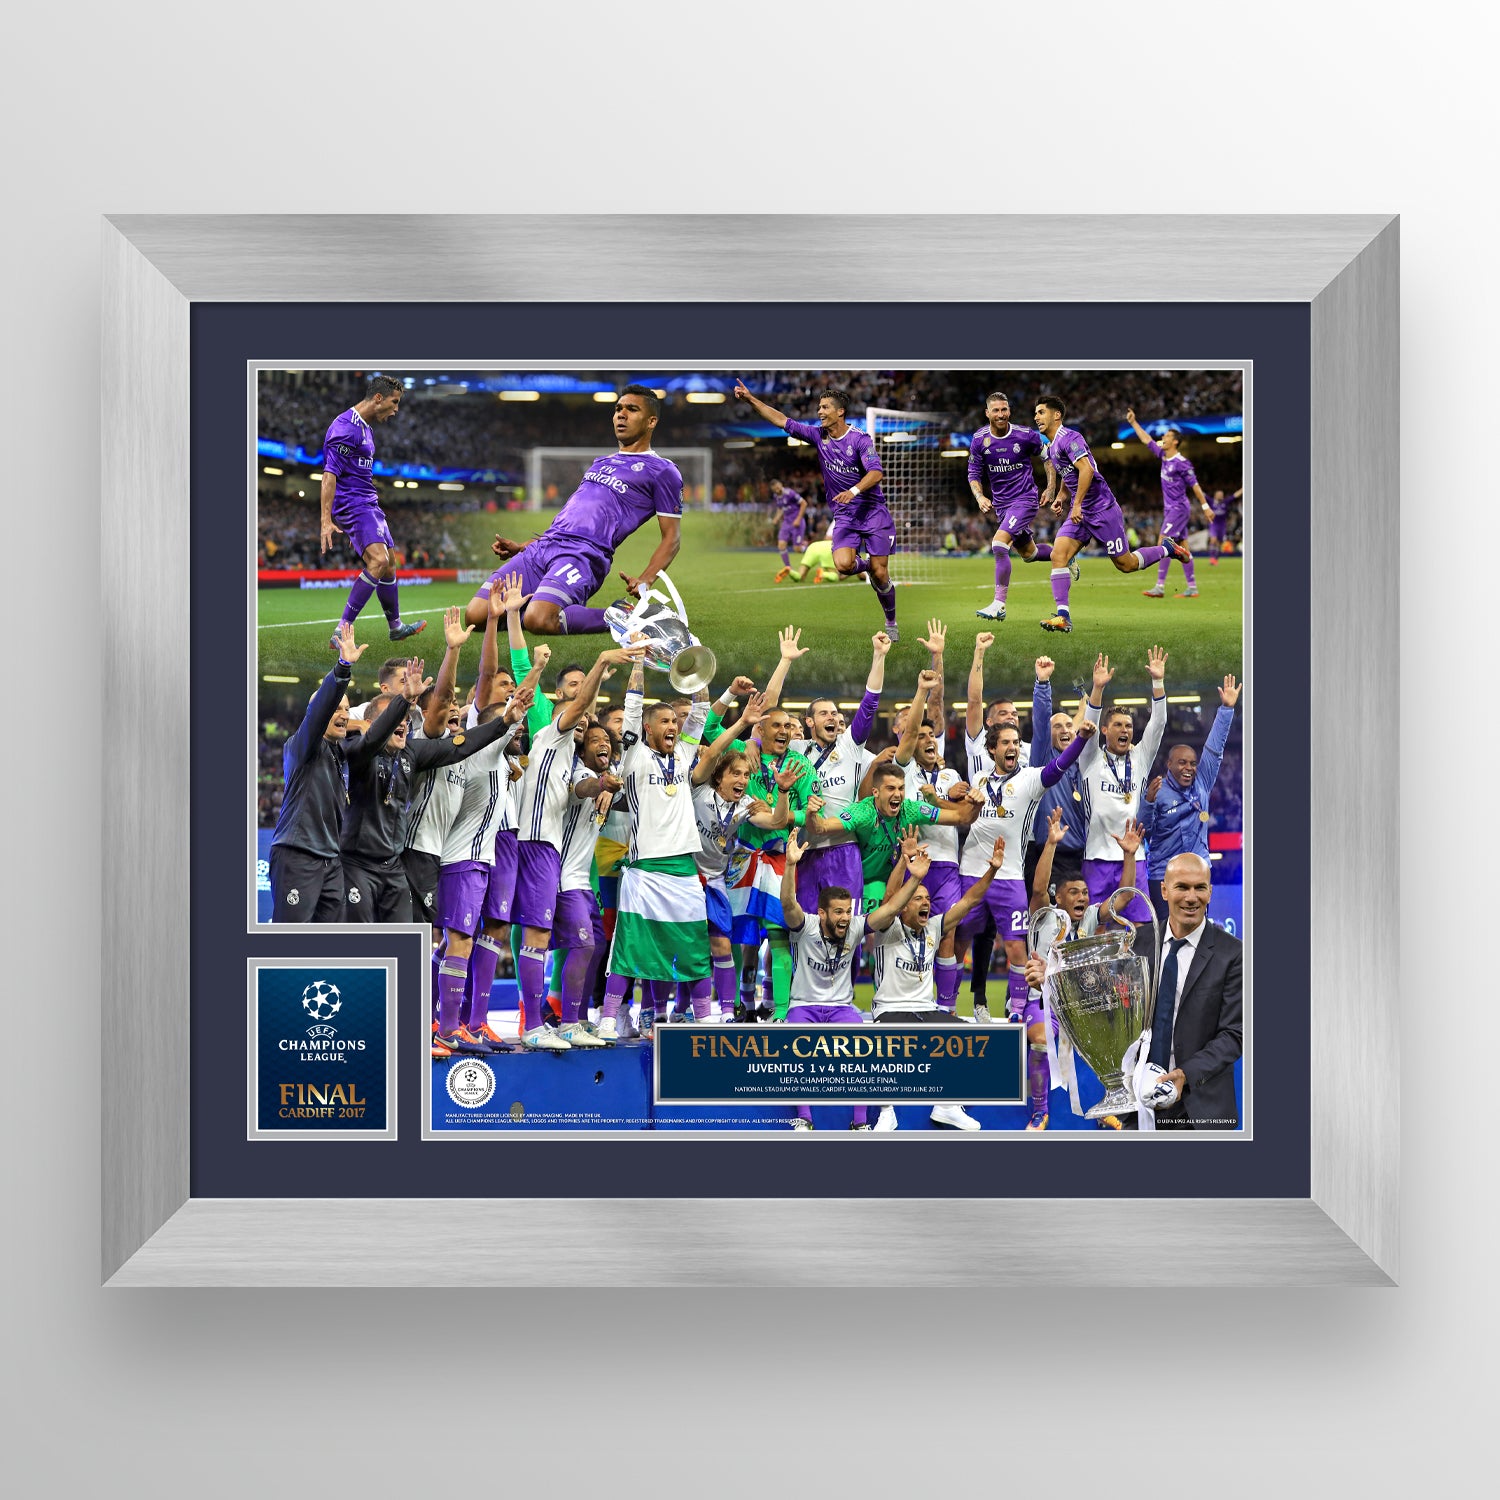 UEFA Champions League 2017 Final - Winner: Real Madrid - Silver Frame UEFA Club Competitions Online Store